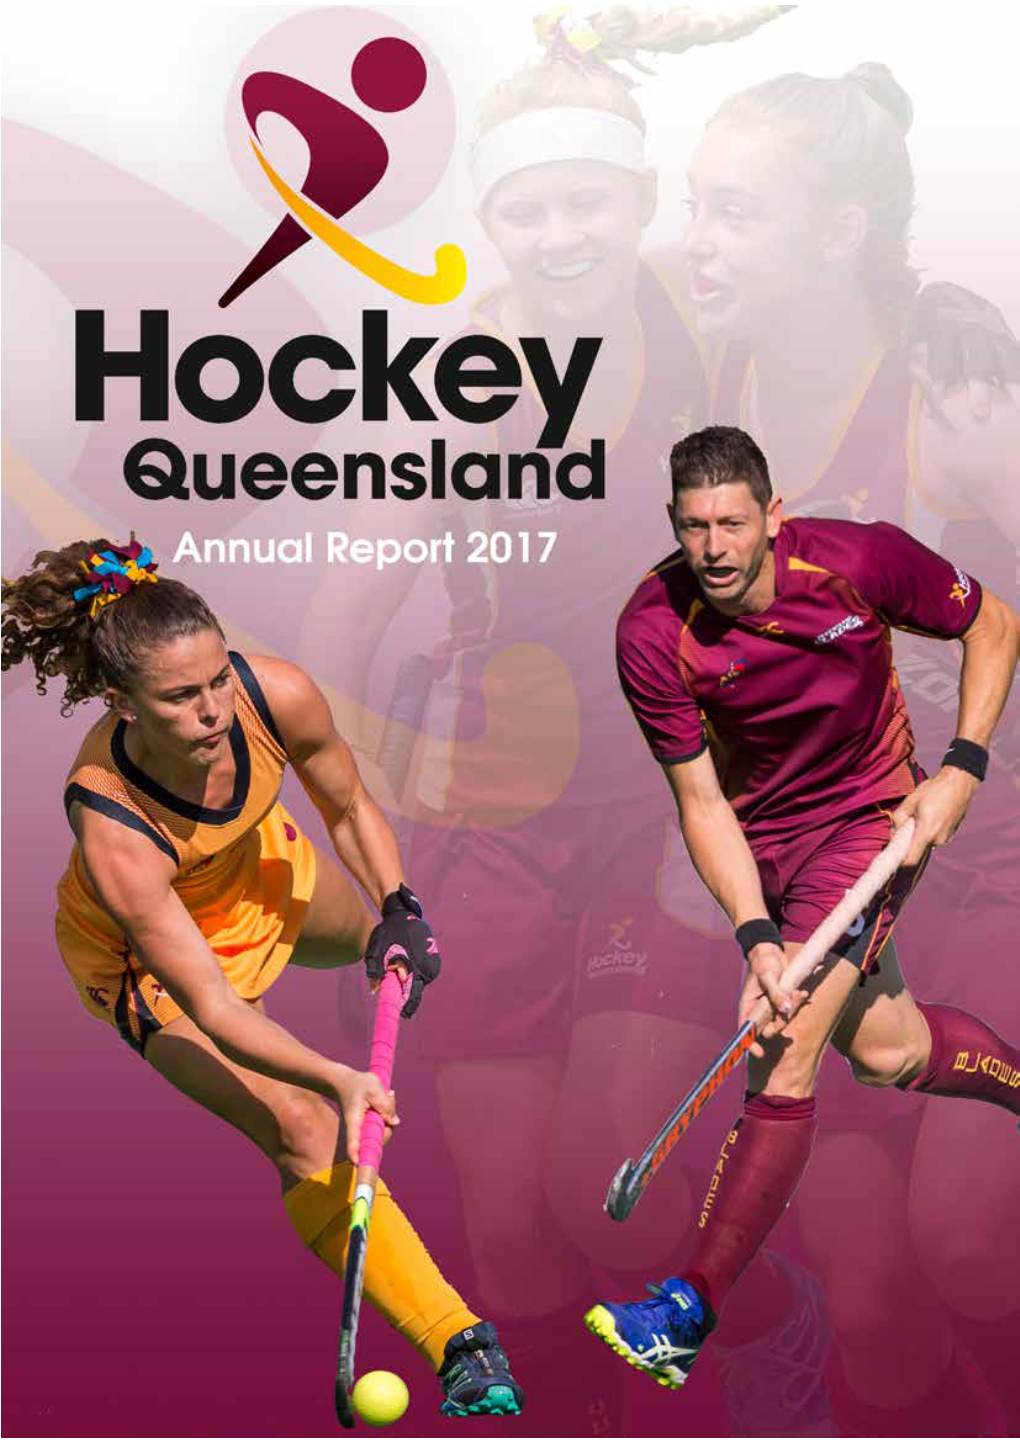 Hockey Queensland Annual Report 2017 Page 1 Vision Statement to Lead and Grow Hockey in Queensland